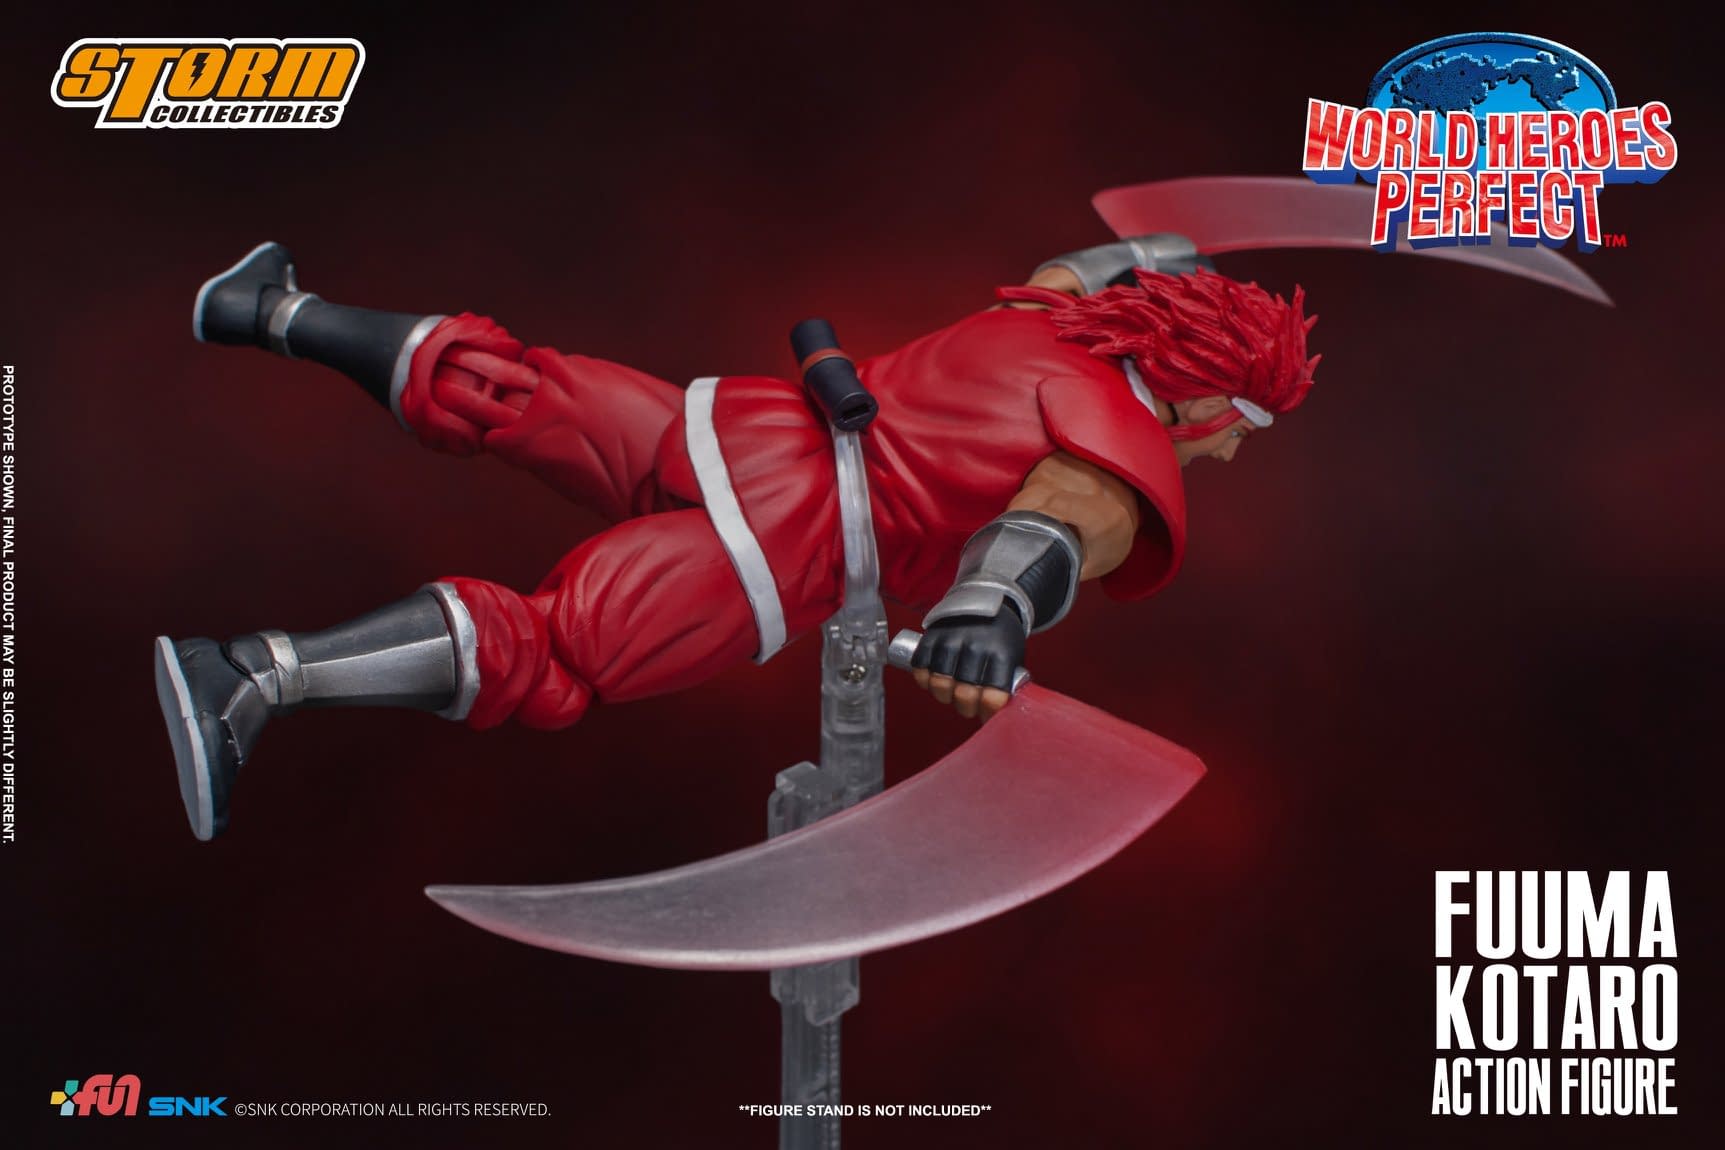 World Heroes Perfect Fumma Kotaro Figure from Storm Collectibles